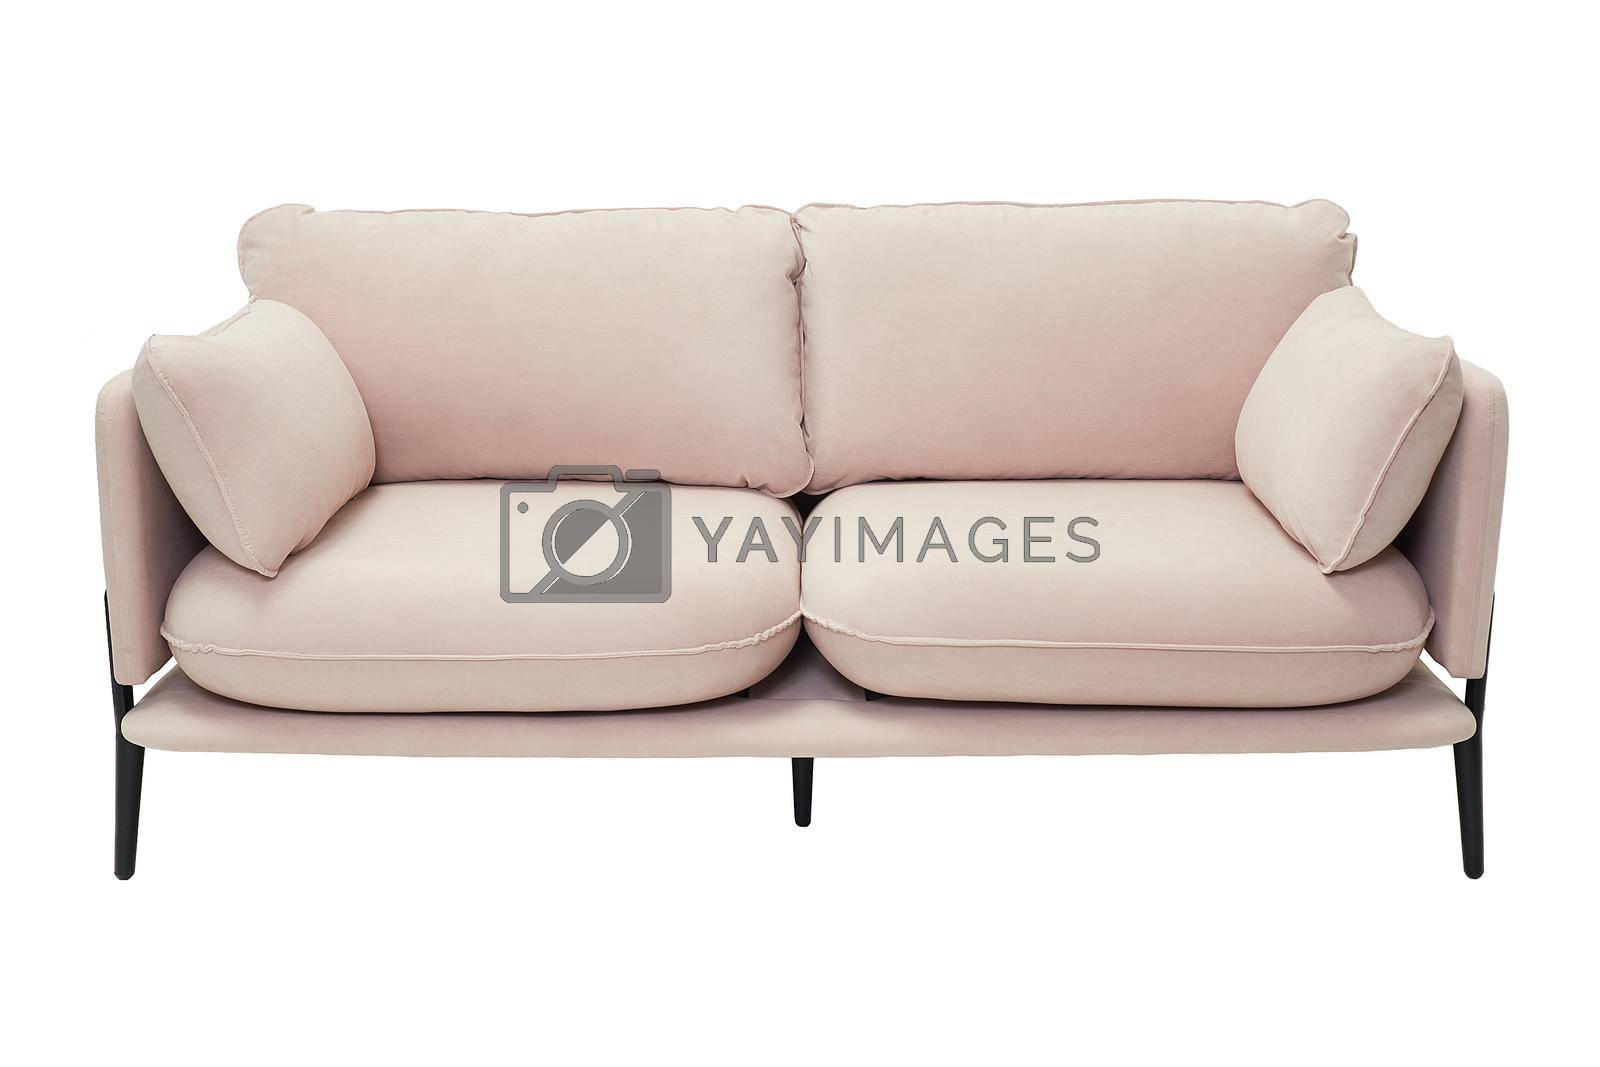 Royalty free image of Modern pink fabric couch with legs isolated on white background, front view by artemzatsepilin